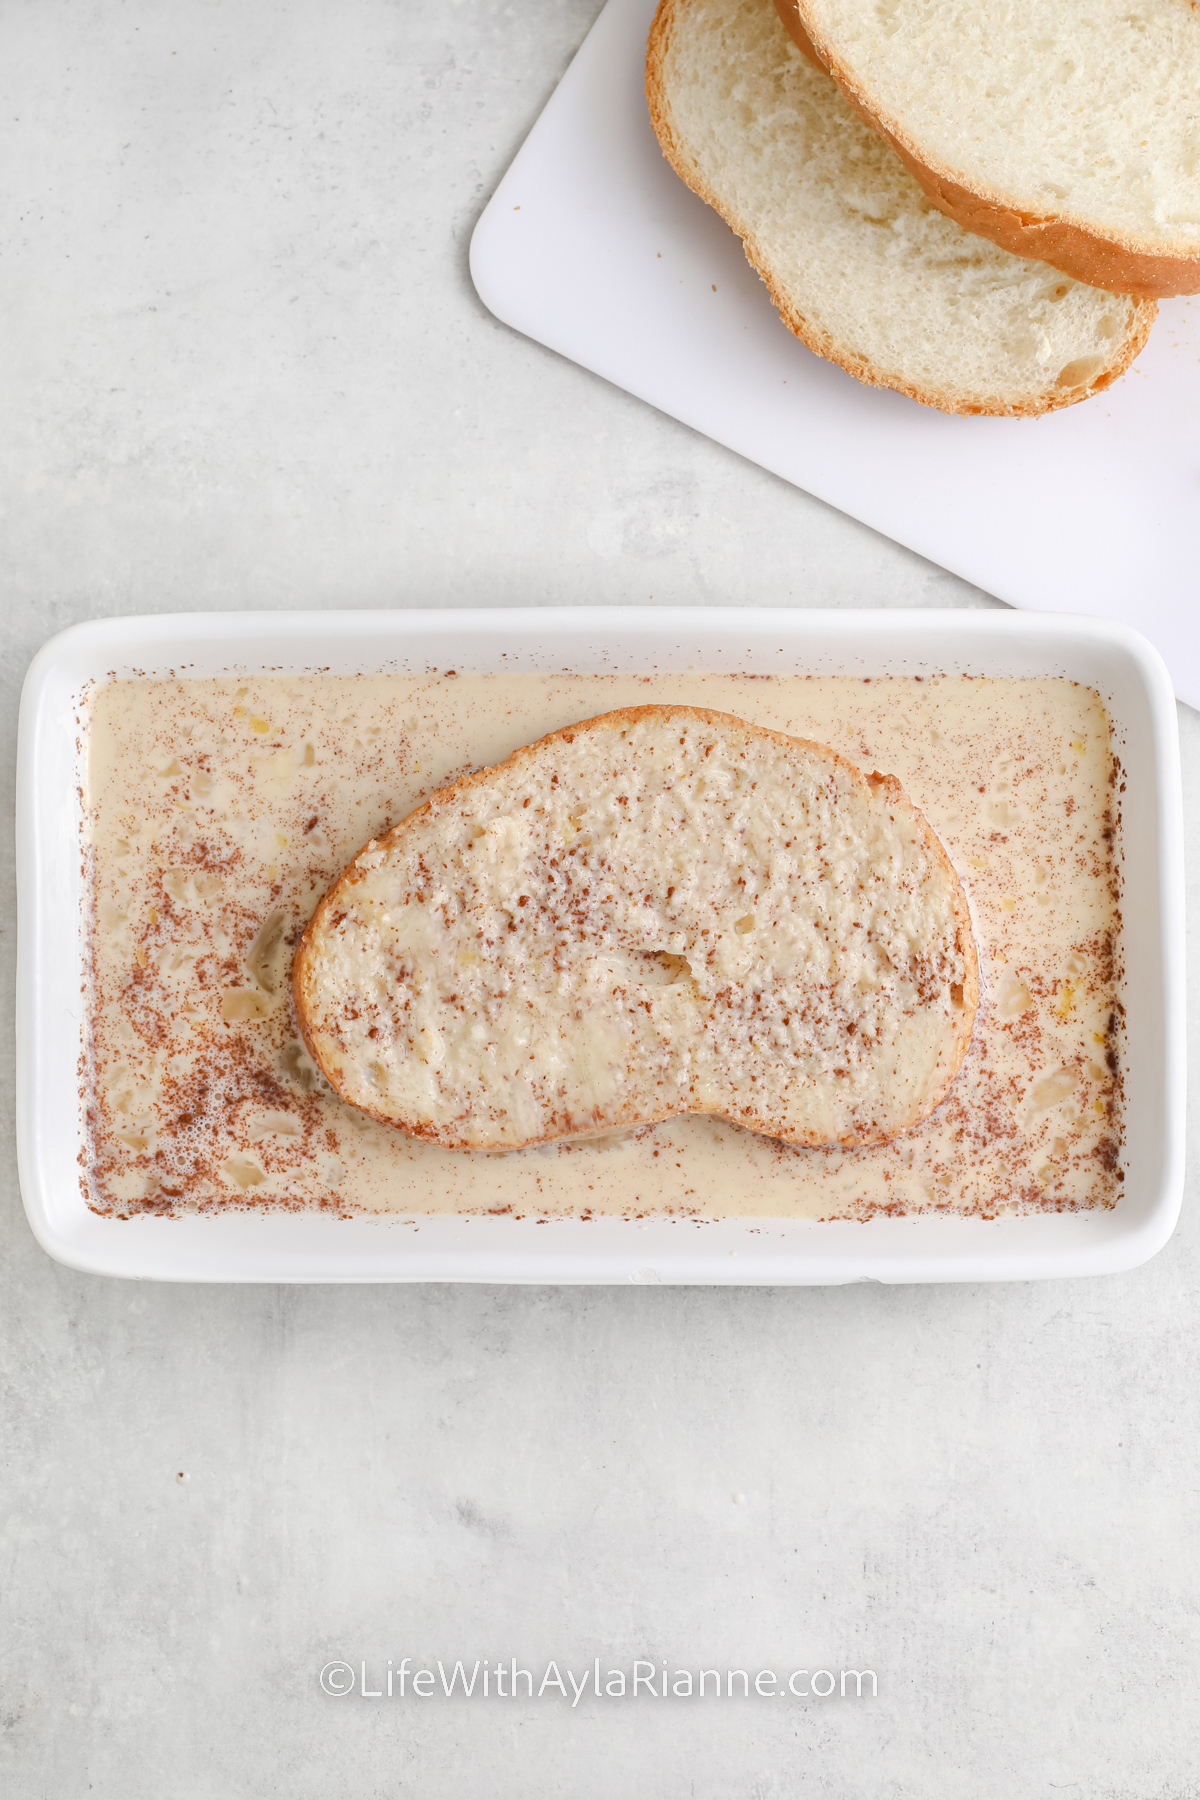 soaking bread in an eggnog & egg mixture for Eggnog French Toast